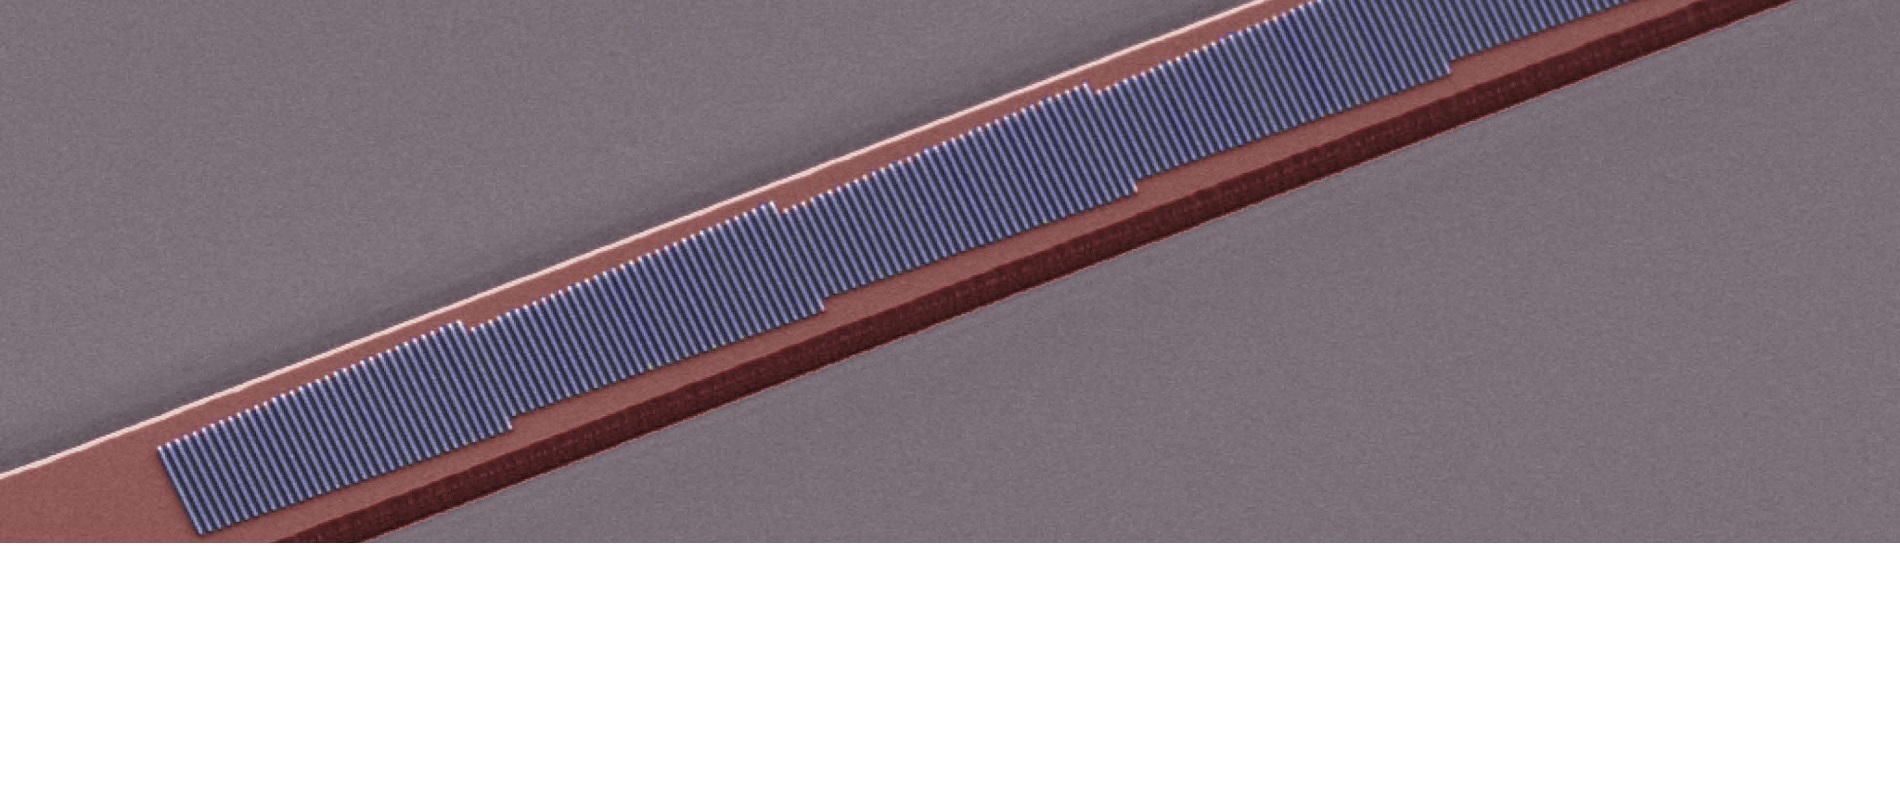 Image of a fabricated device showing four phased antenna arrays consisting of silicon nano-rods of different lengths patterned on the top surface of a LiNbO3 waveguide